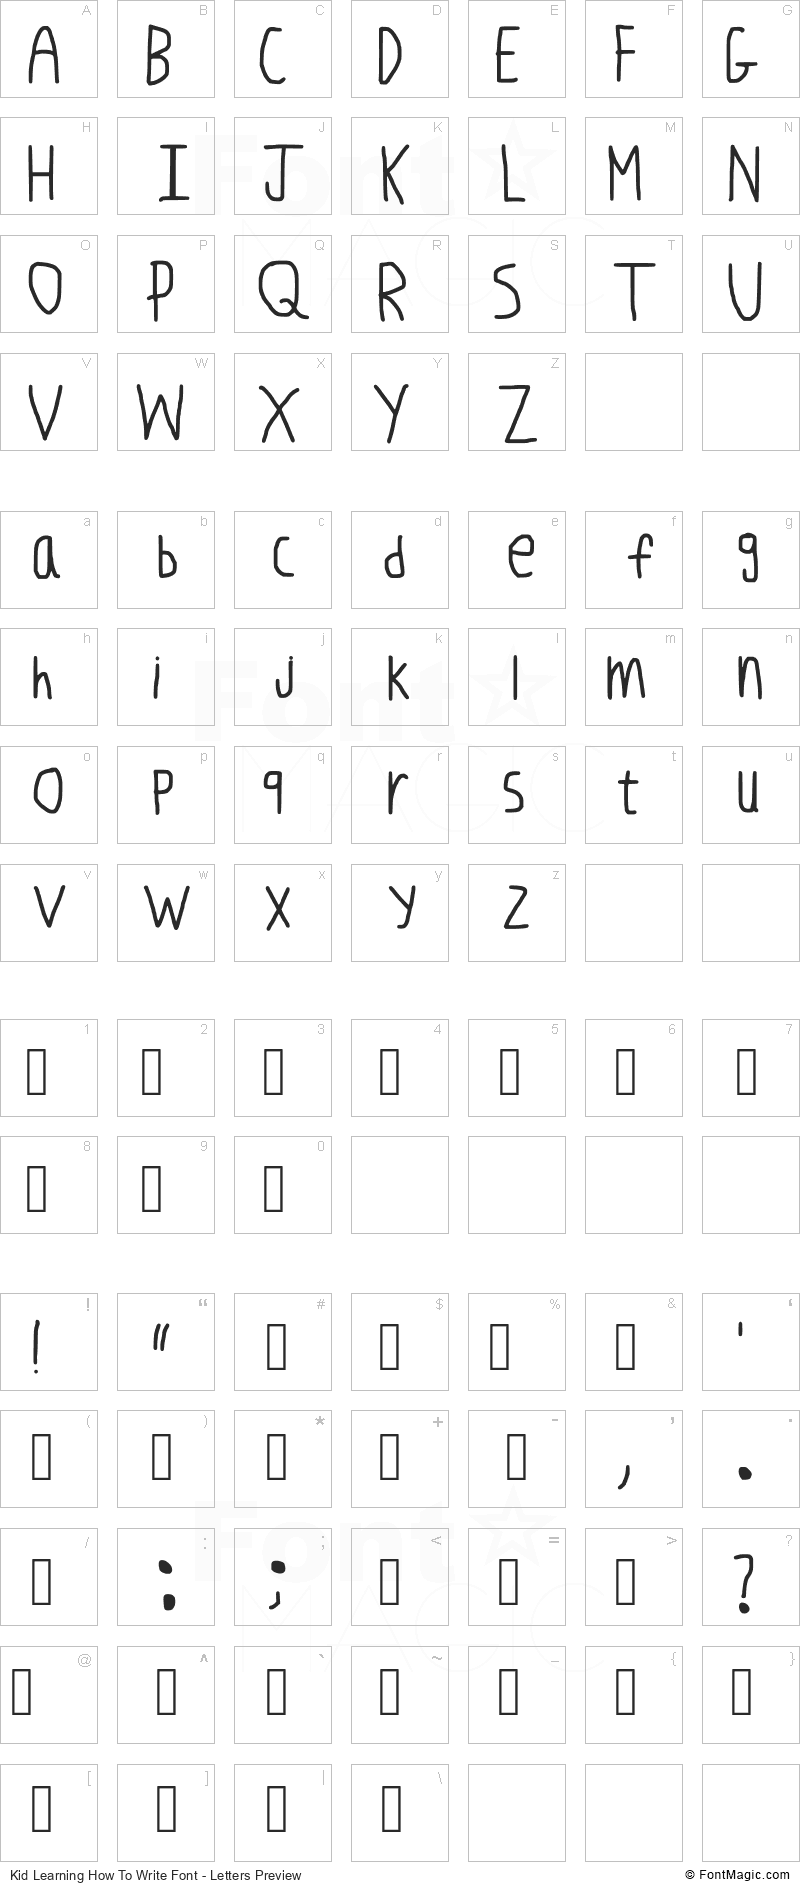 Kid Learning How To Write Font - All Latters Preview Chart